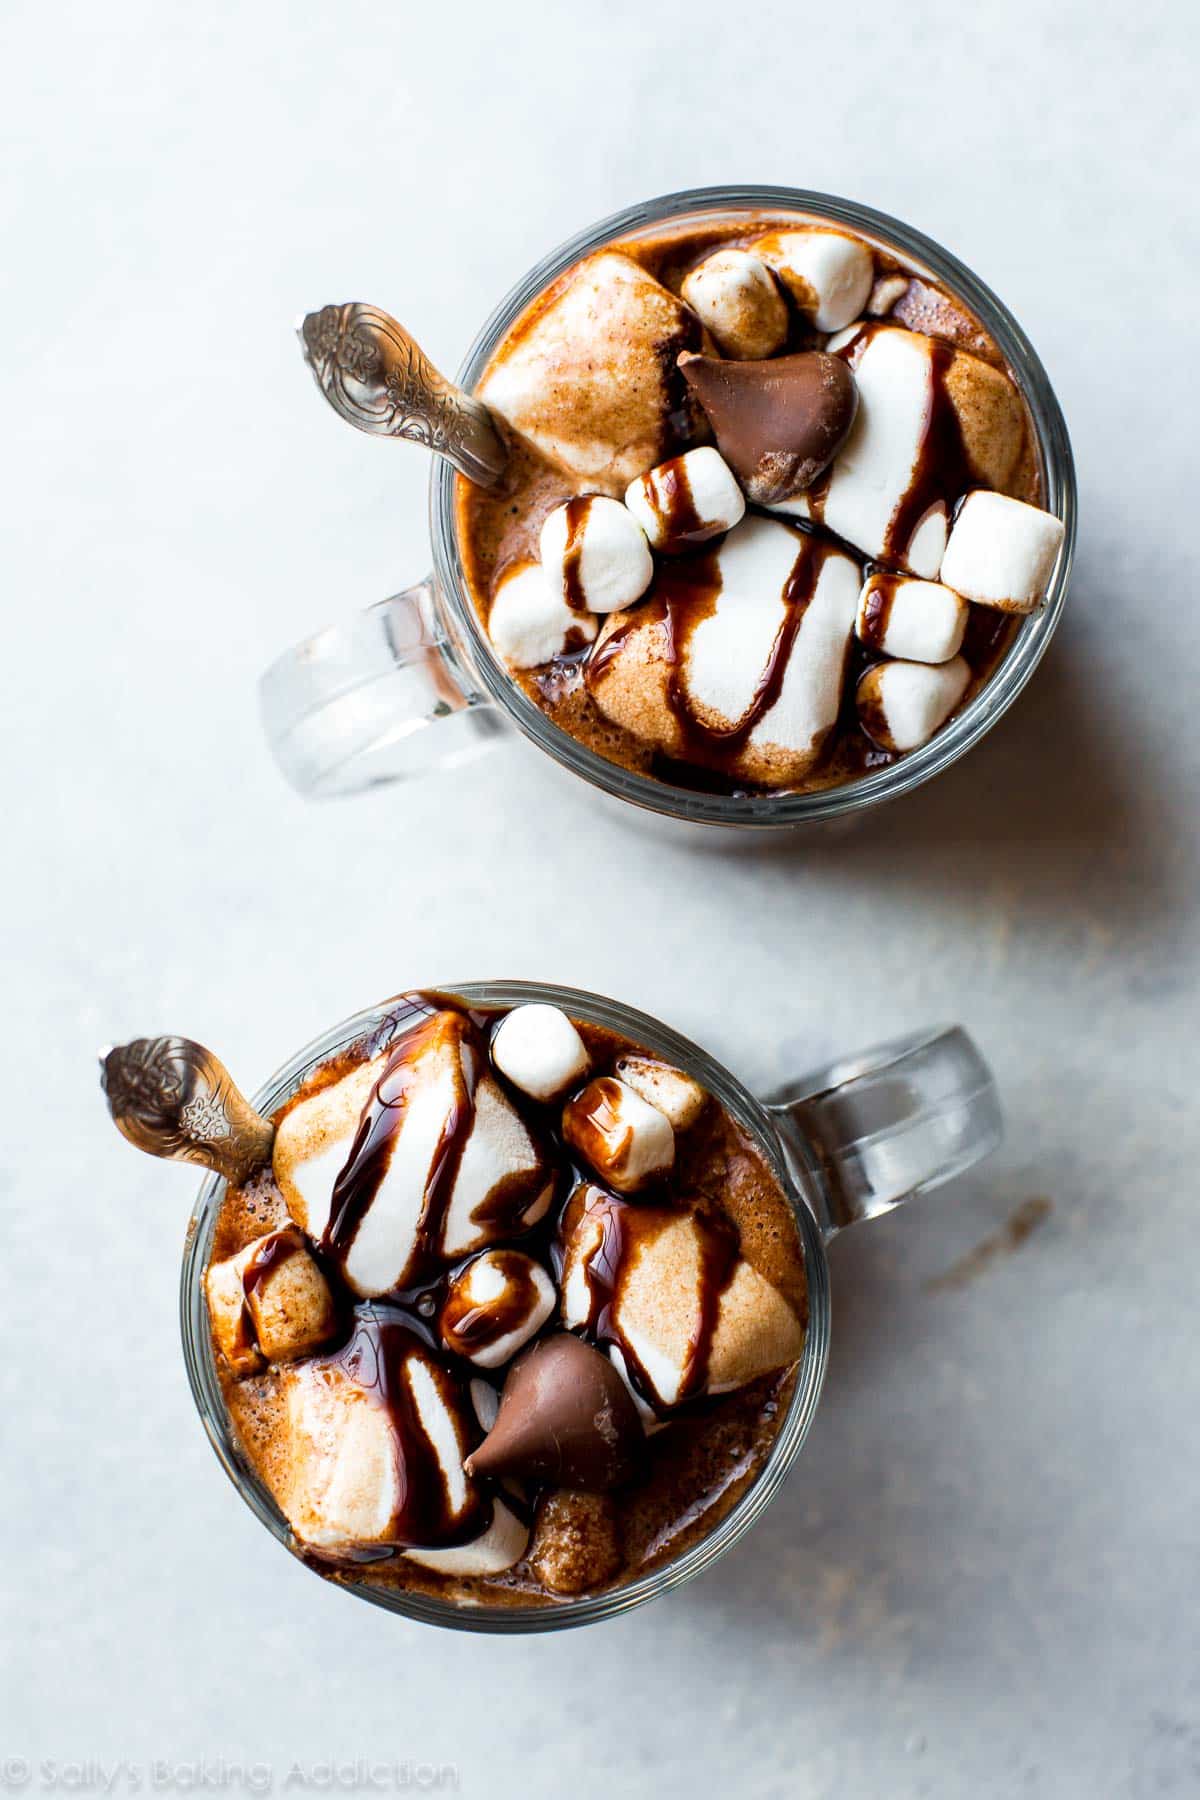 overhead image of 2 glass mugs of hot chocolate topped with marshmallows, chocolate sauce, and a Hershey's kiss